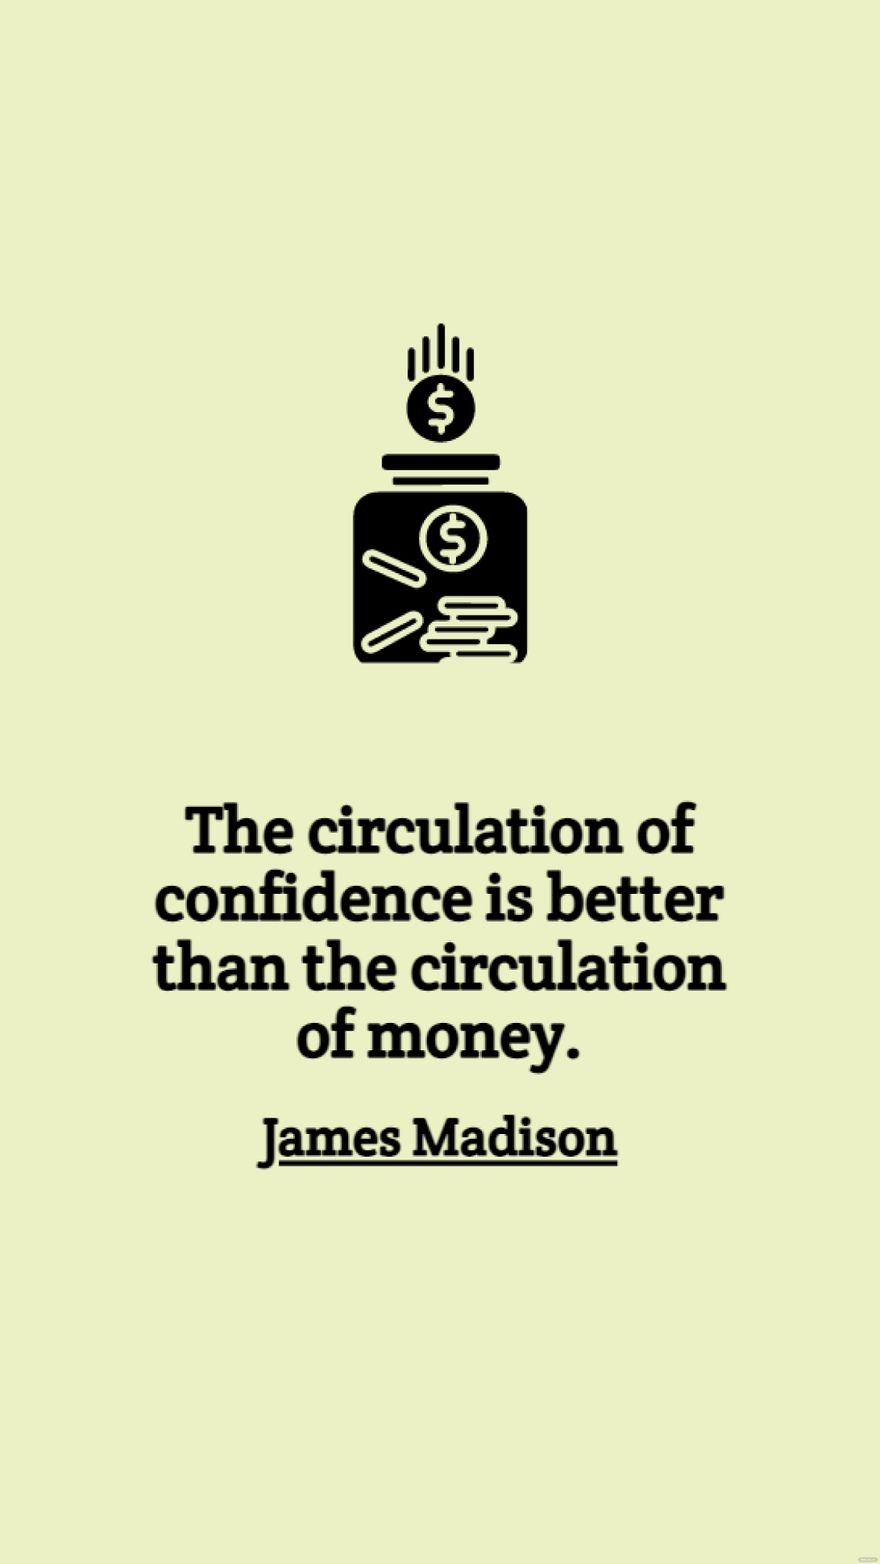 James Madison - The circulation of confidence is better than the circulation of money. in JPG